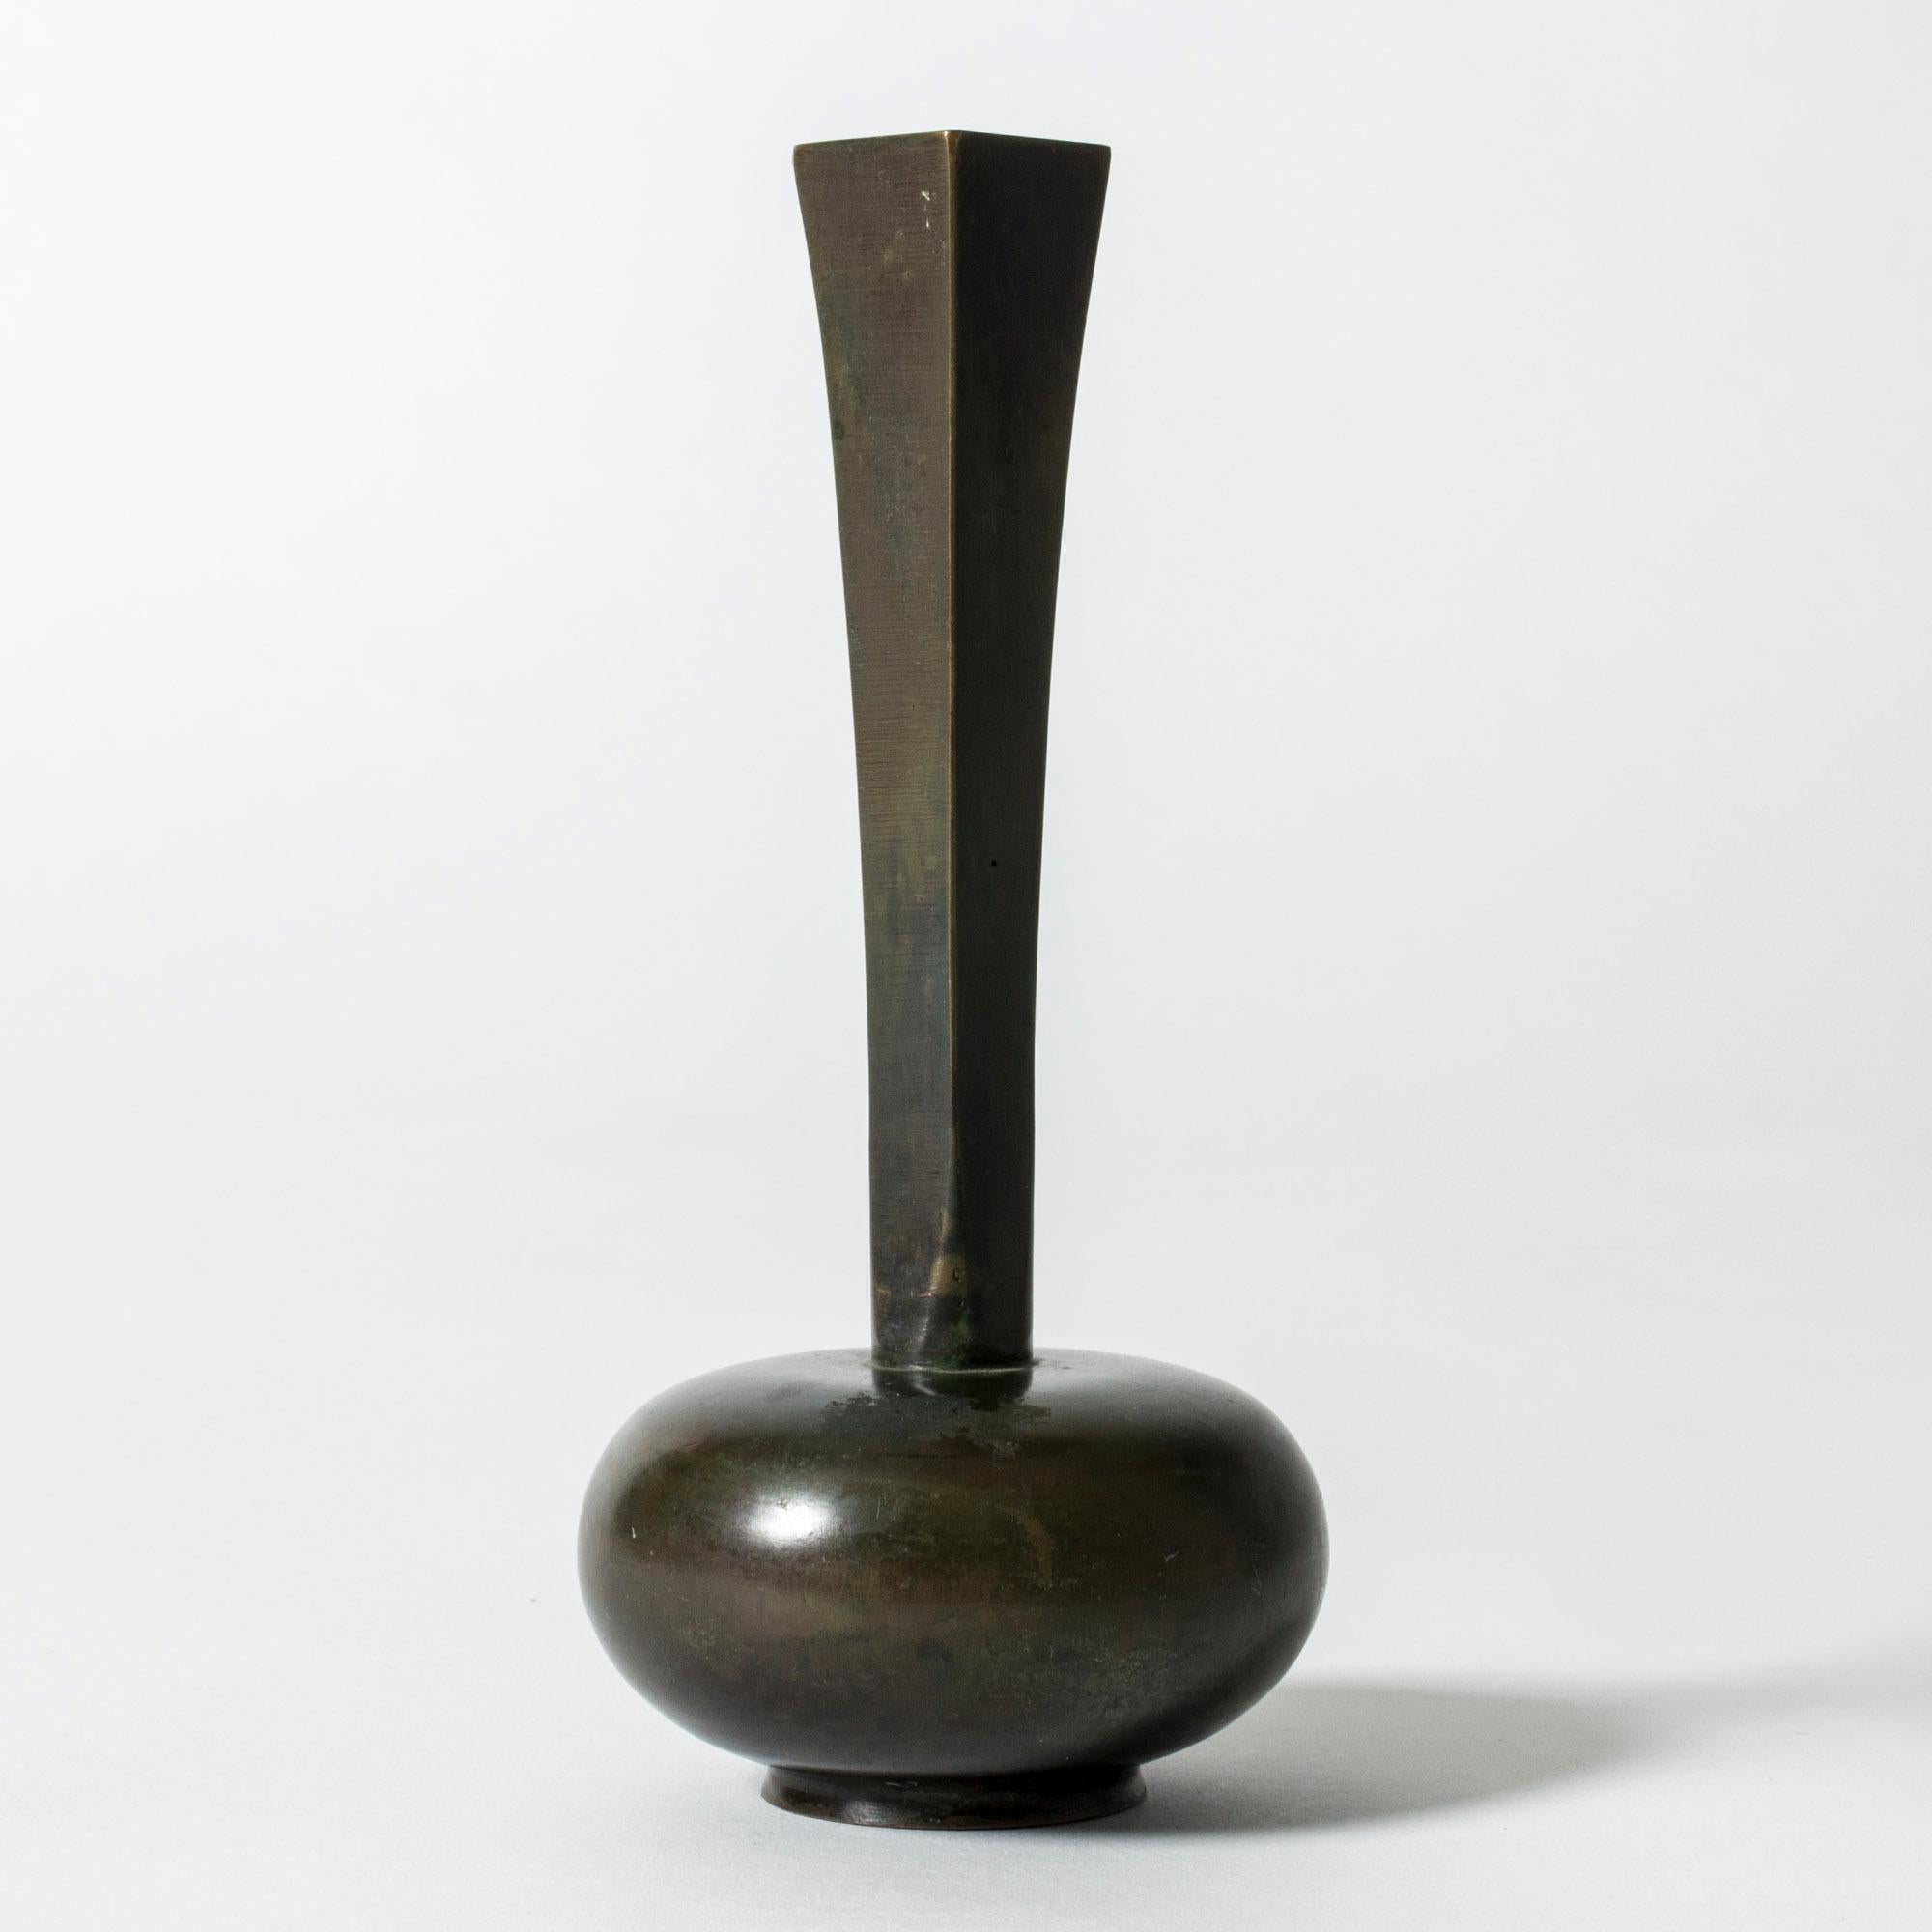 Beautiful bronze vase from GAB, patinated dark green in varying nuances. Plump base contrasted with a slender, tapering neck.

GAB was founded in Stockholm in 1867 and was an important influence on the Swedish art and crafts and industrial design